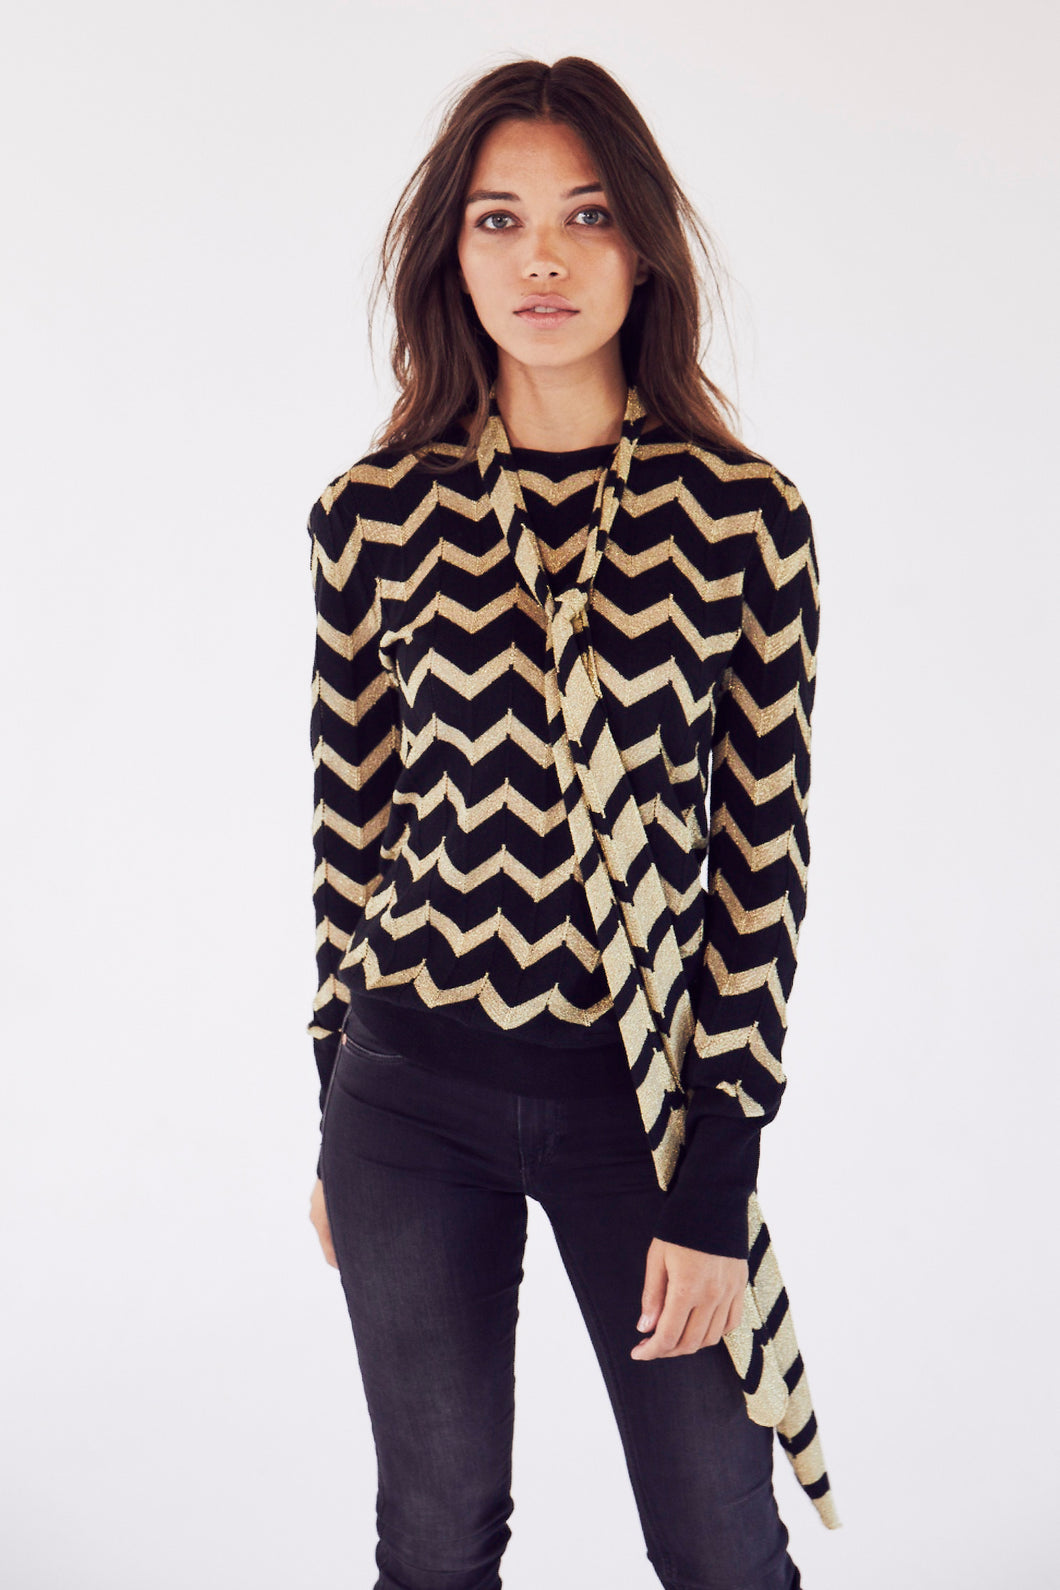 Lucille in Black and Gold Chevron